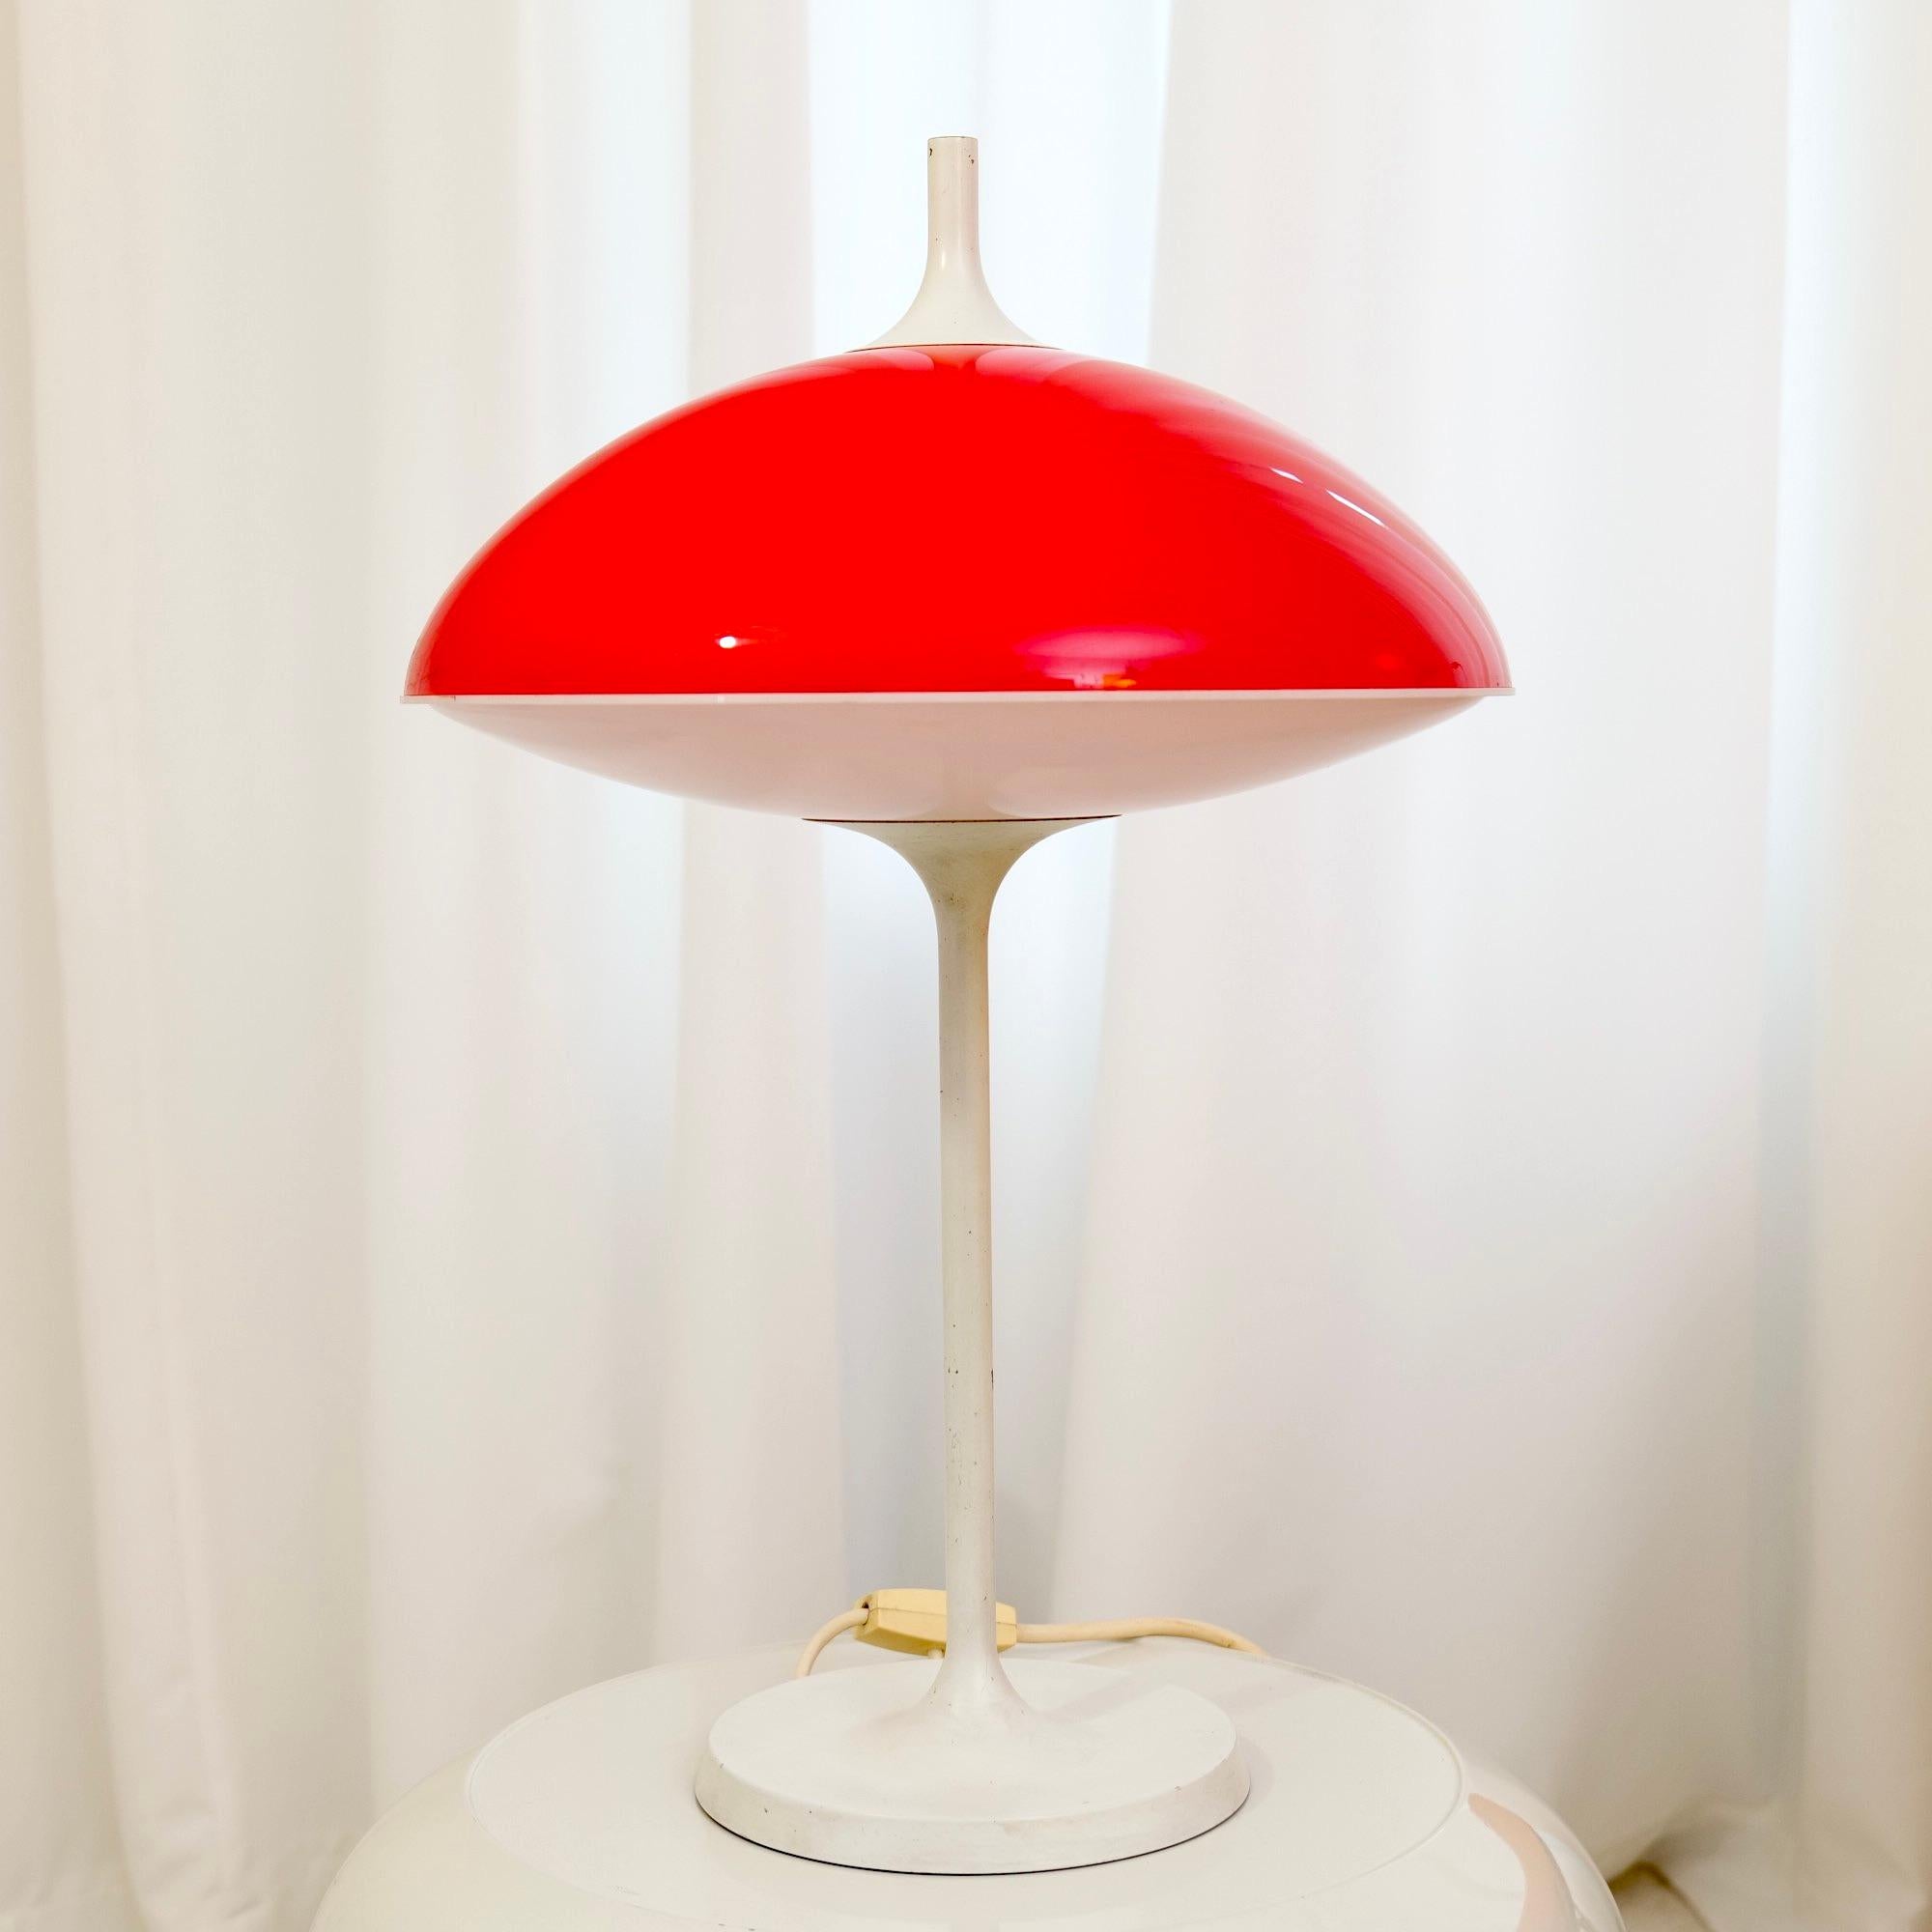 Rare space-age Lamp by Teme Leuchten made in the 1970s
Iconic red-white colour

good condition with patina on the paint